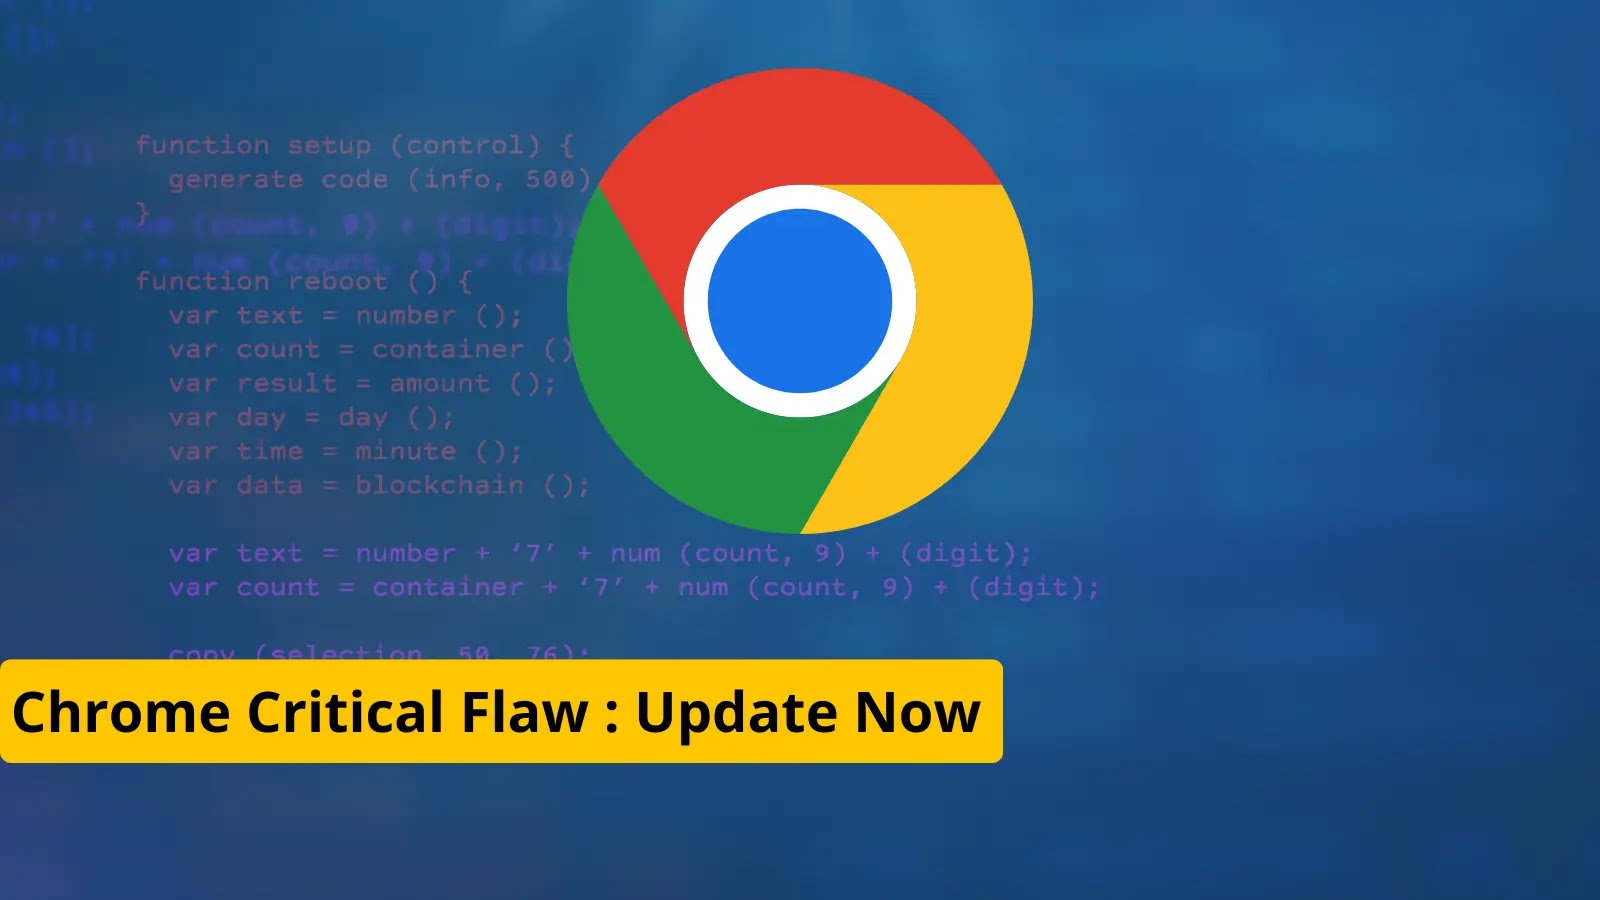 Chrome Critical Flaw Let Attackers Execute Arbitary Code : Patch Now